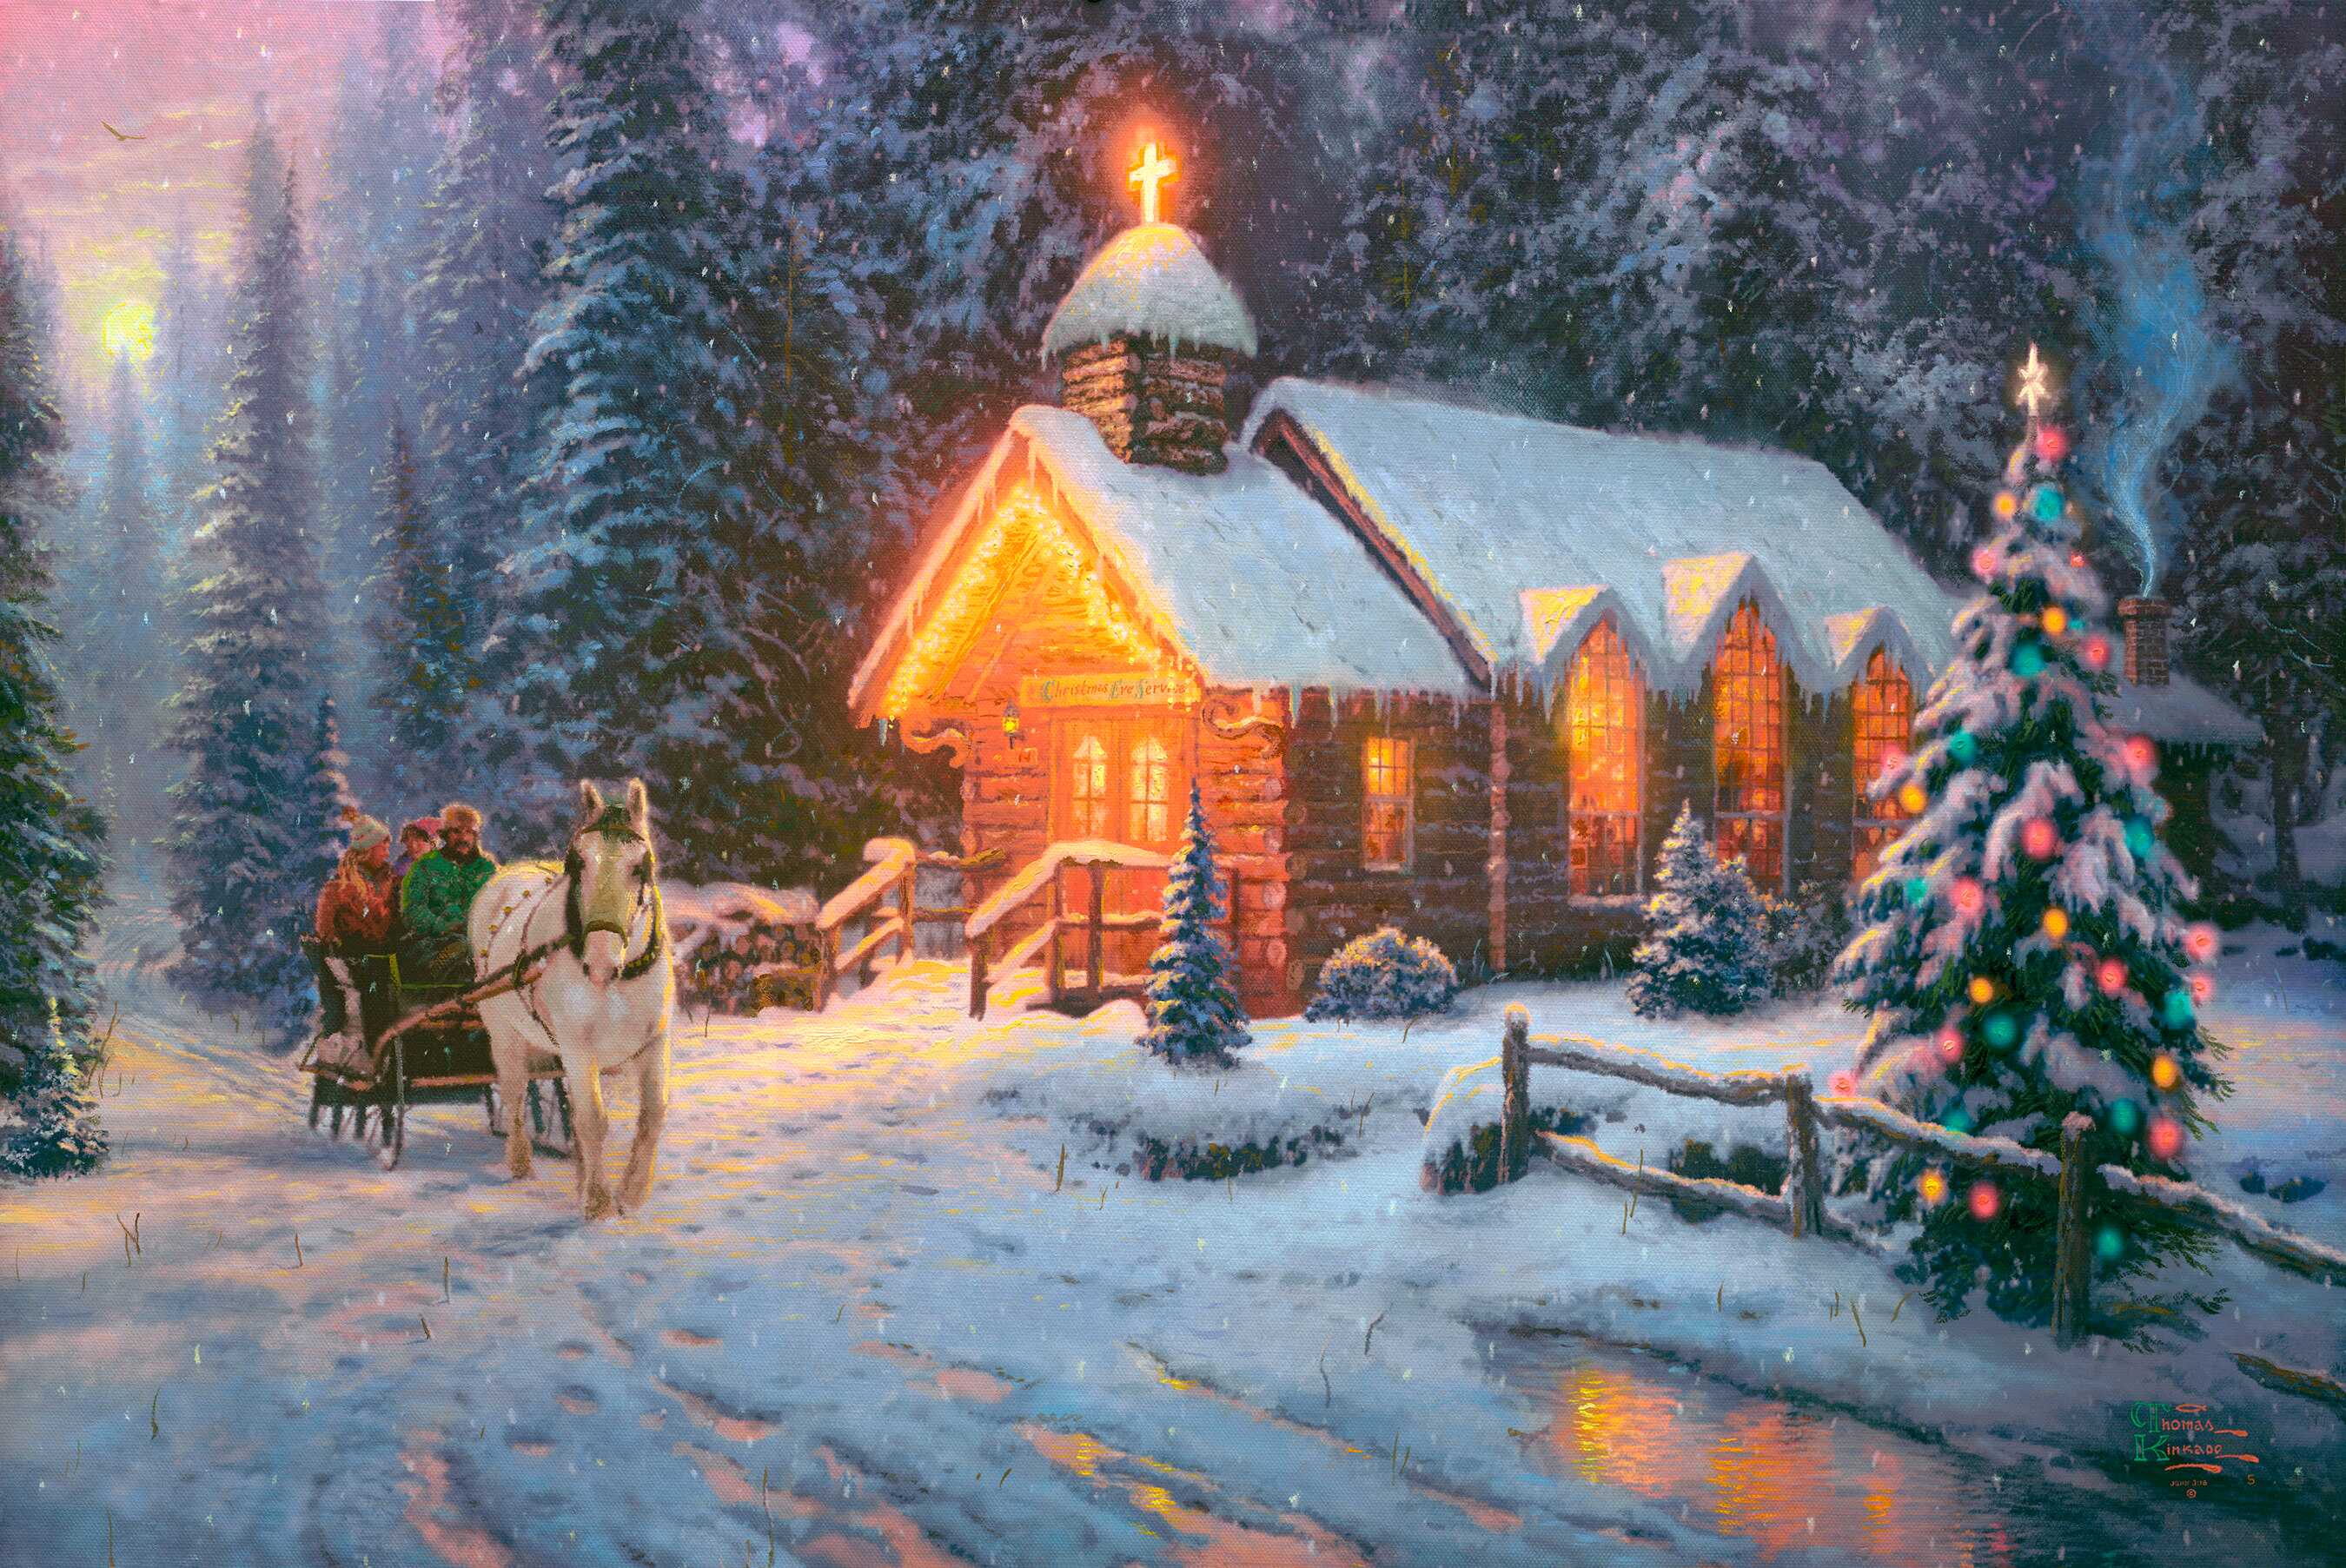 Thomas Kinkade Studios  httpthomaskinkadecomarthighcountrychristmas  Introducing a new Holiday painting from the Thomas Kinkade Vault  High Country  Christmas This image is particularly special because it is based on the  Christmases Thom